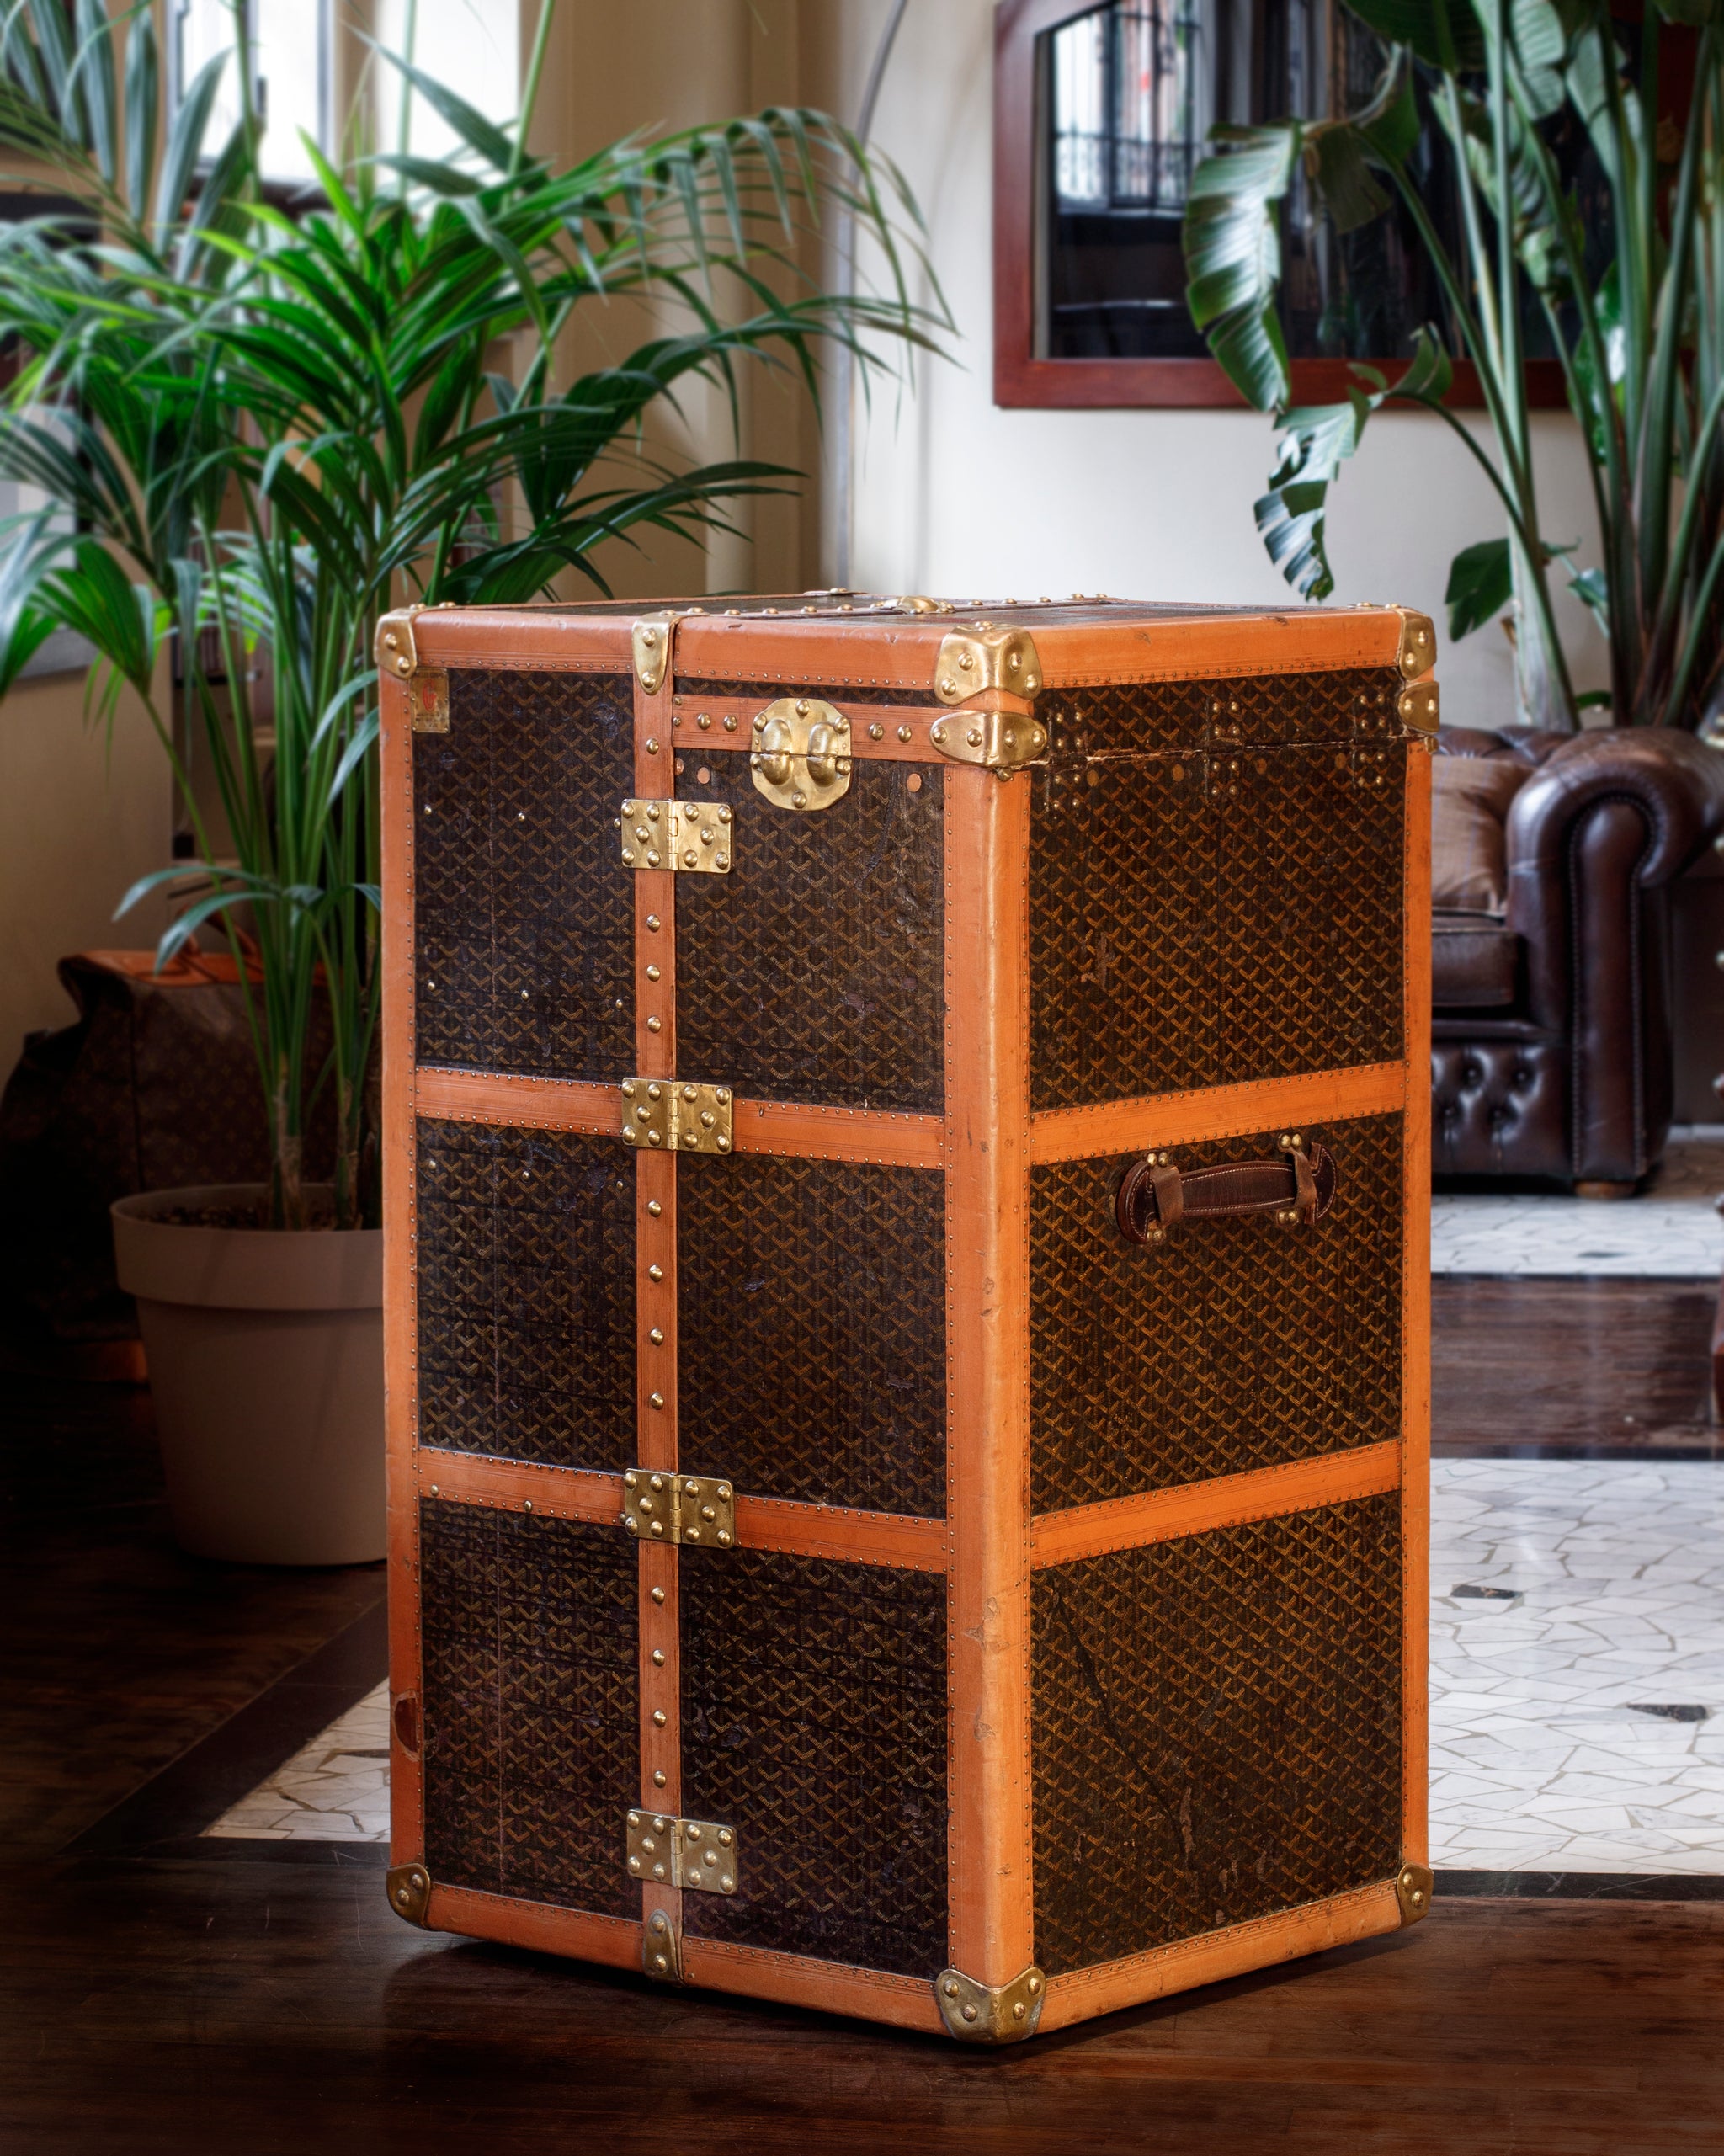 here is one for our watch collectors! a Goyard watch trunk with